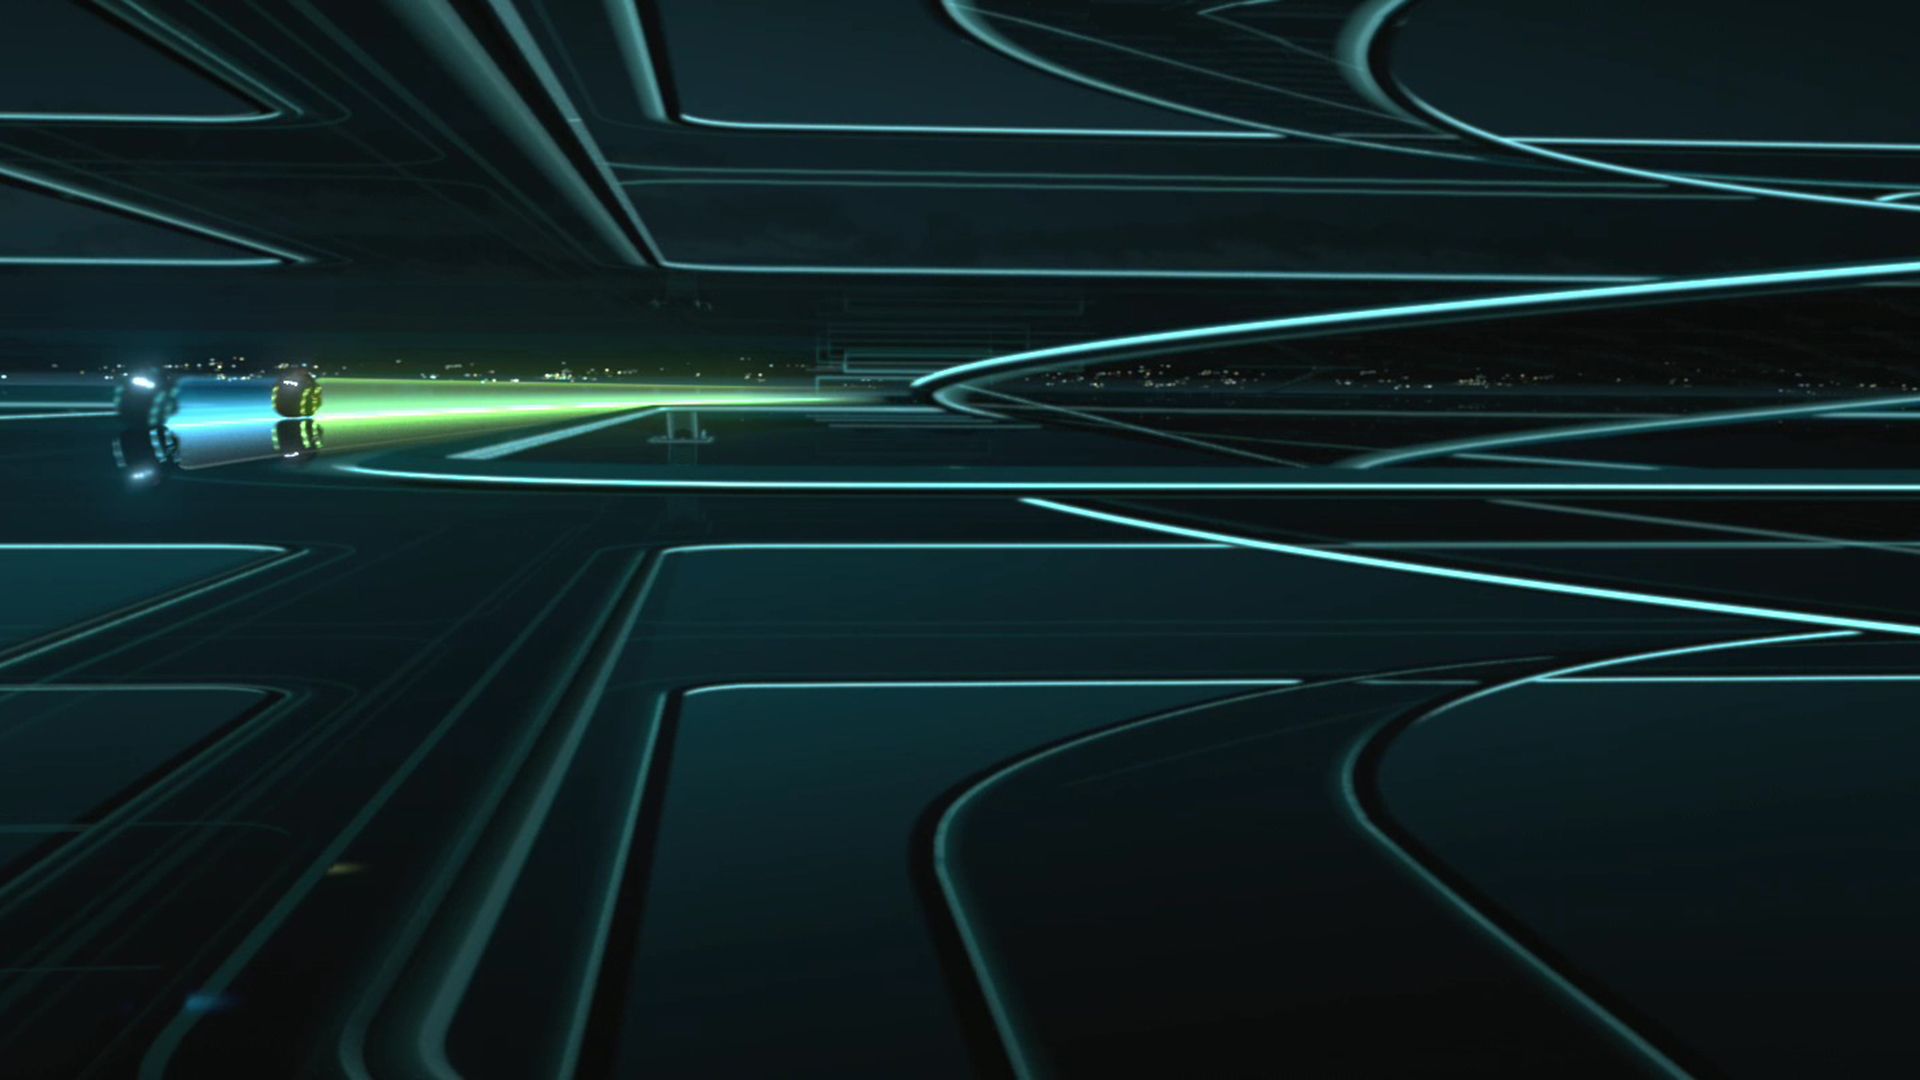 Tron Legacy wallpapers